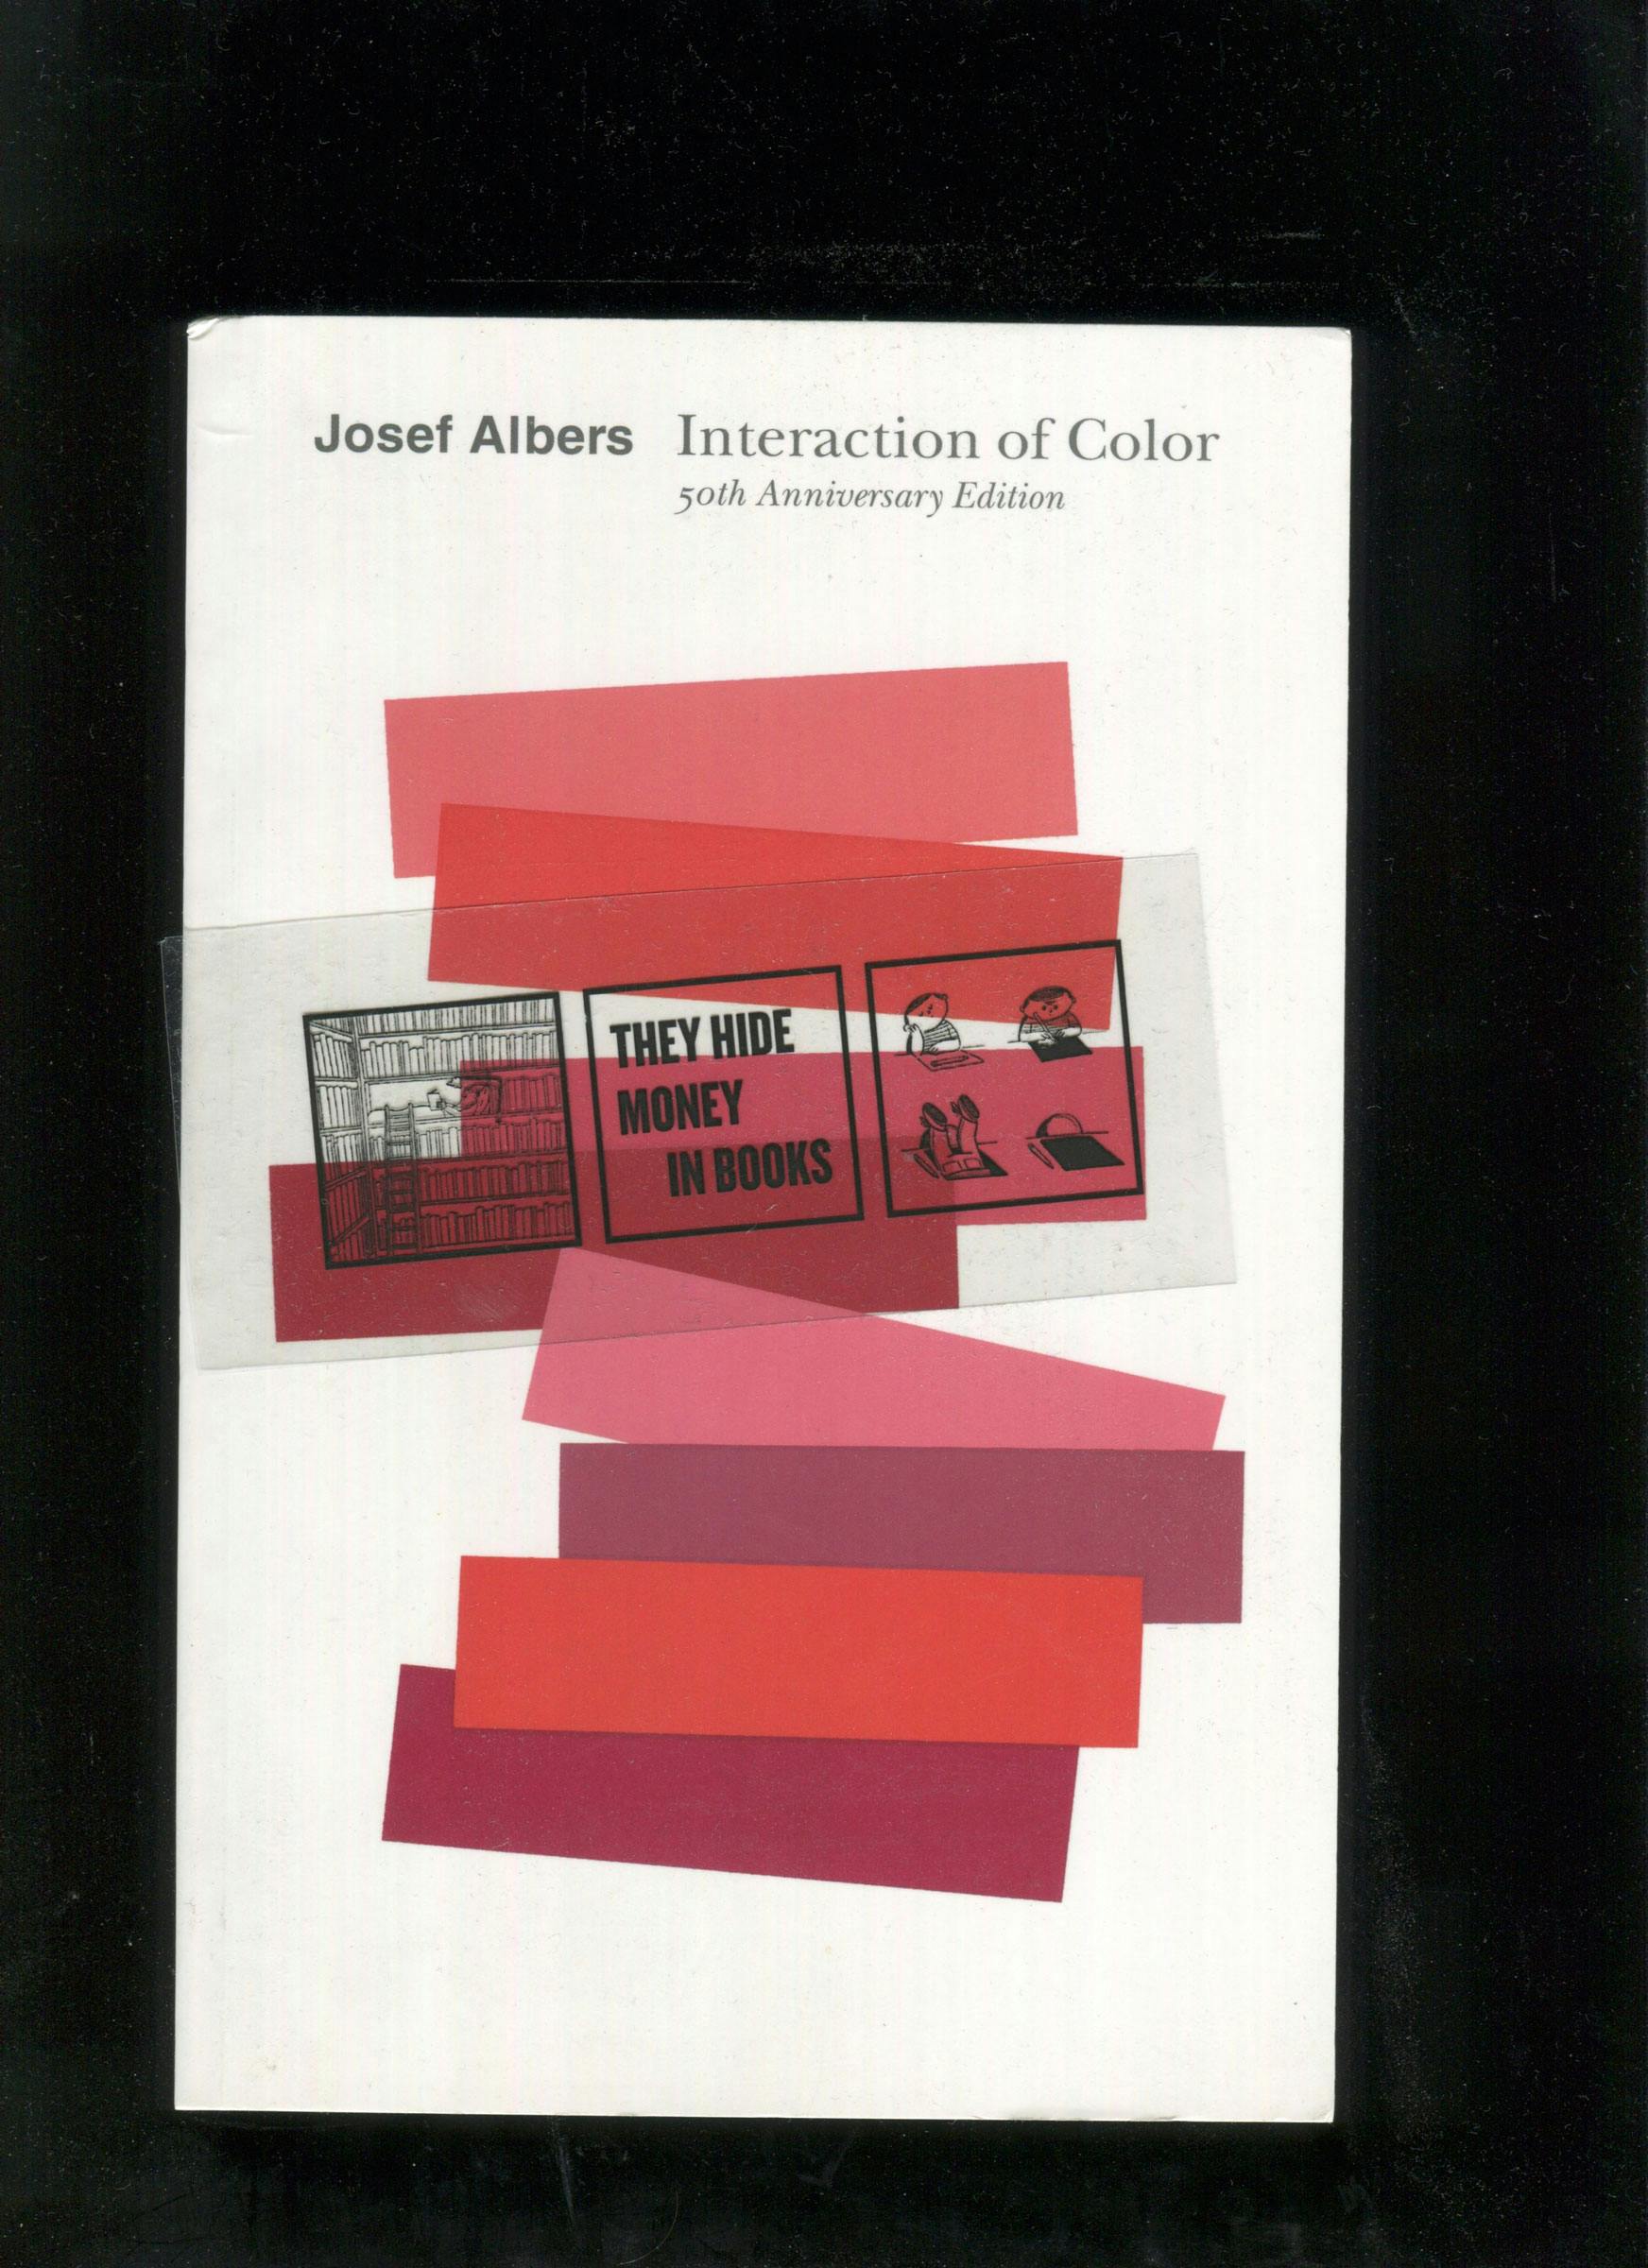 Josef Albers Interaction of Color